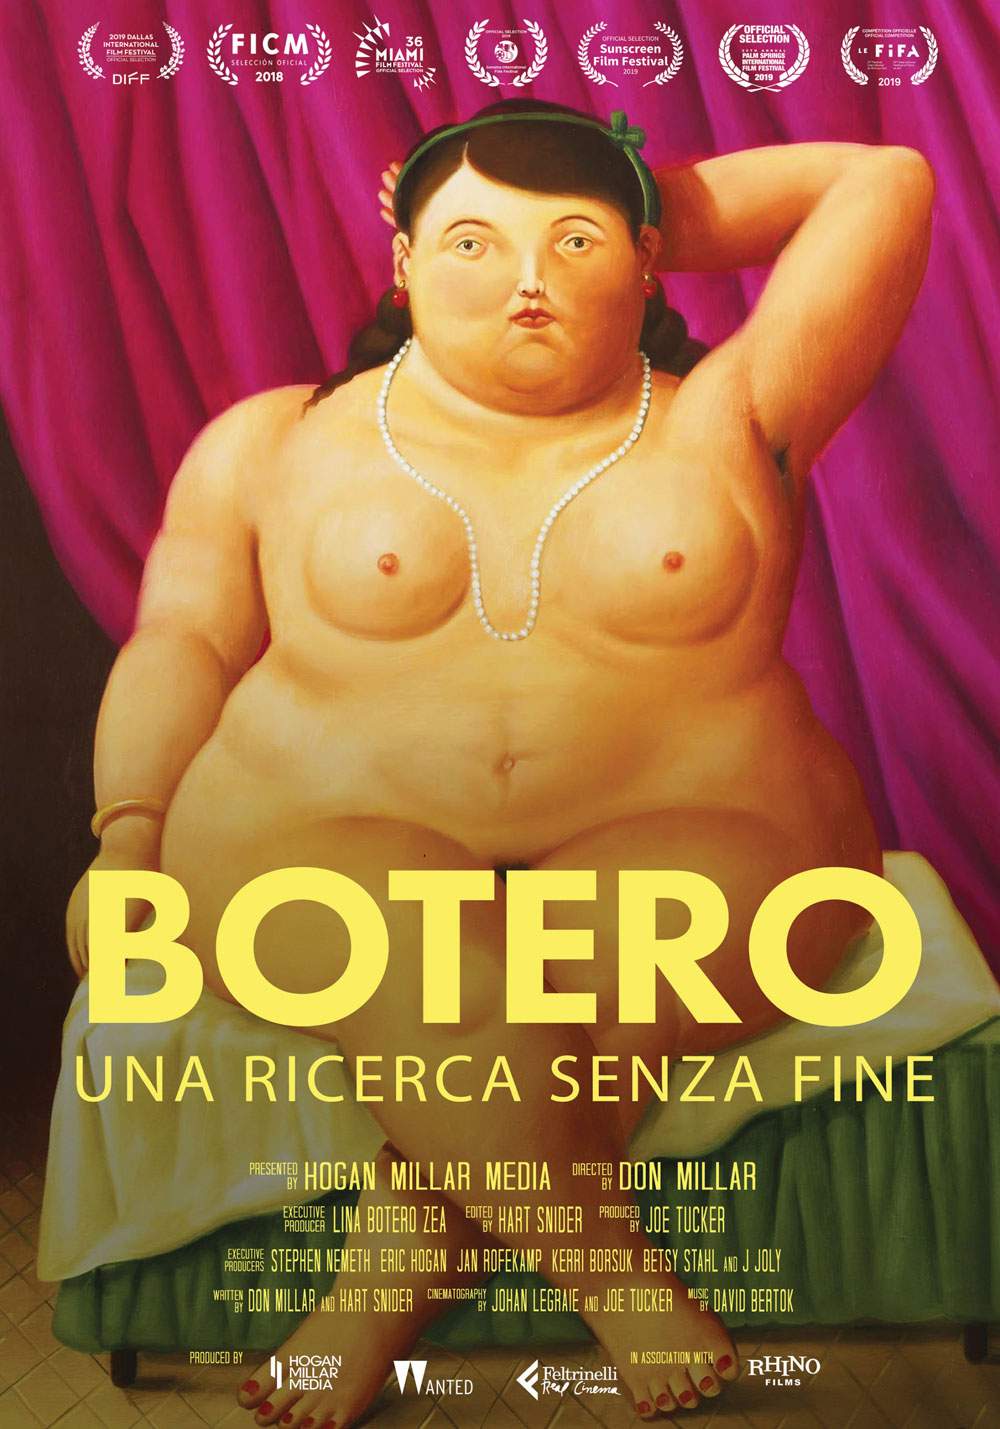 An unprecedented documentary dedicated to Fernando Botero is in theaters